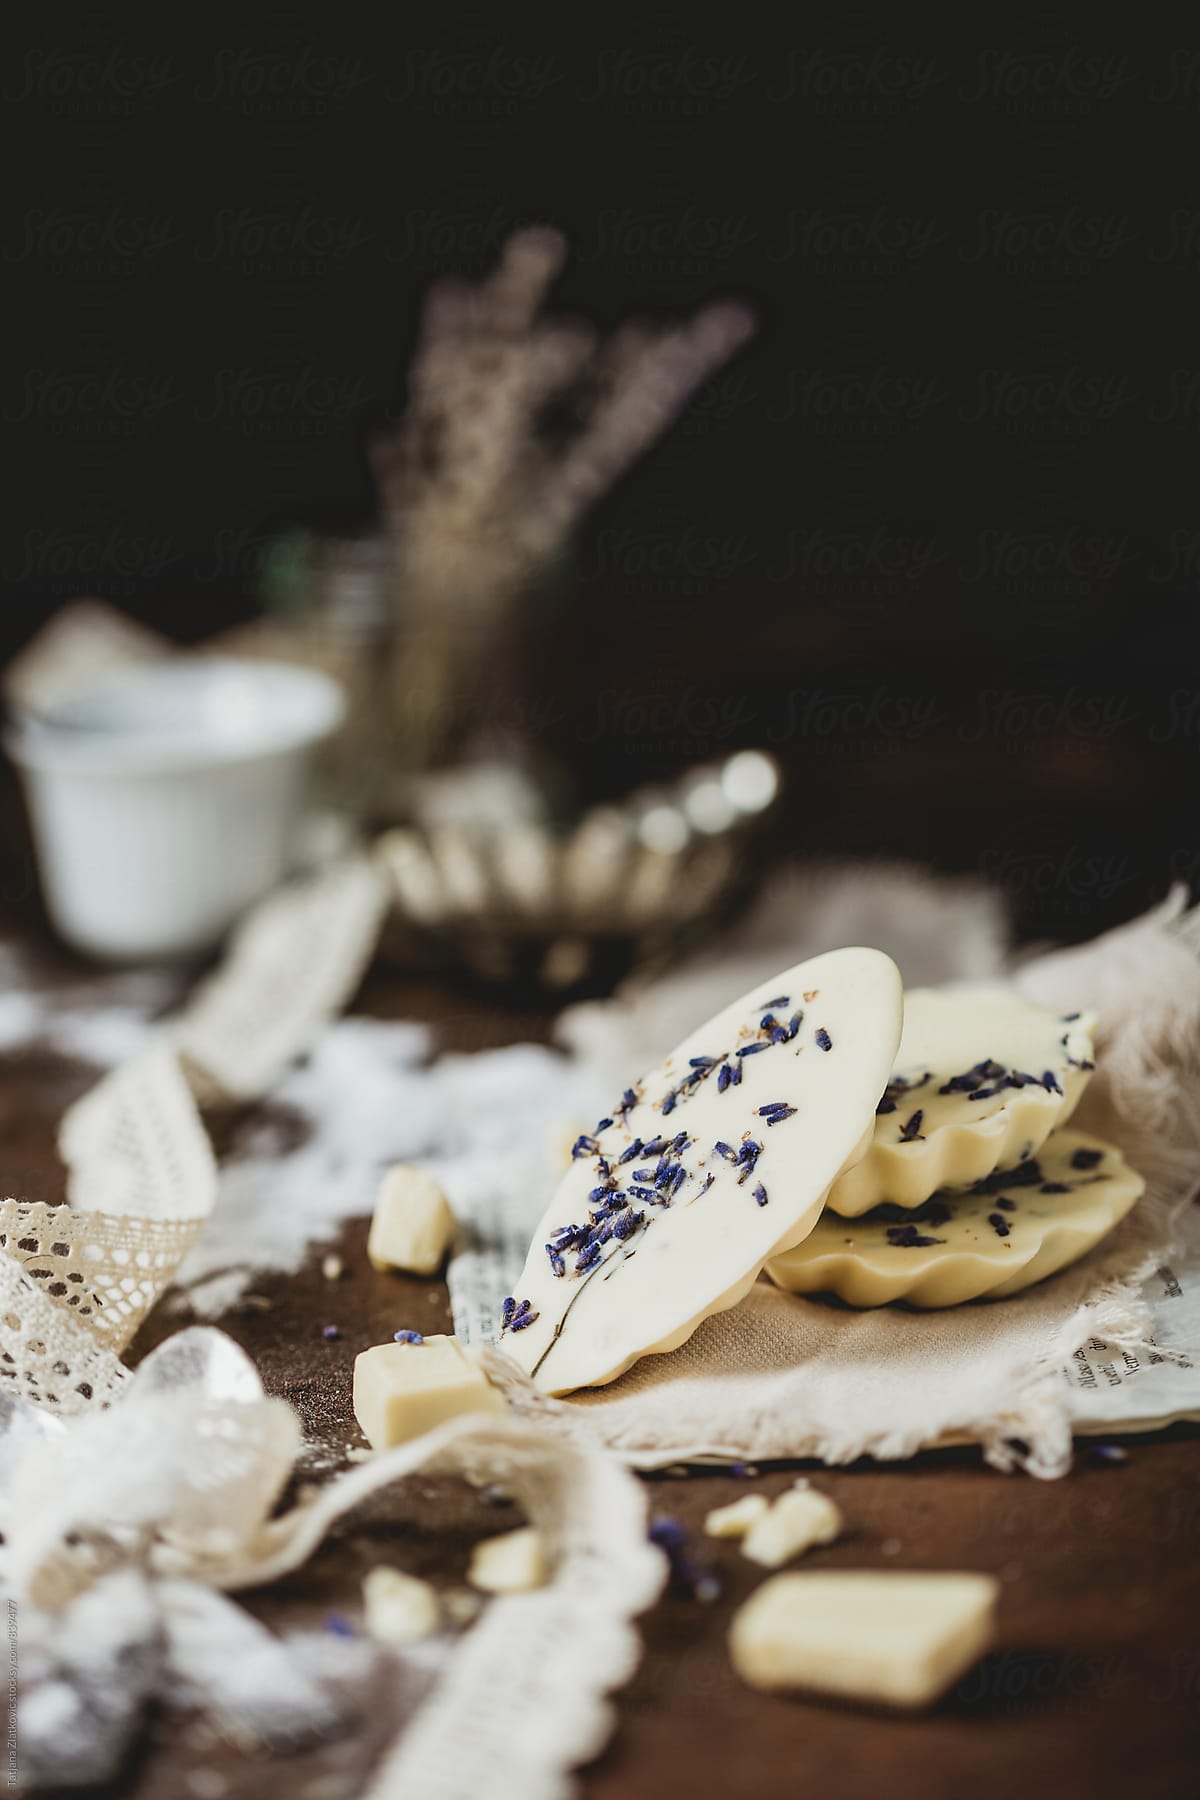 Homemade pralines with white chocolate and lavender